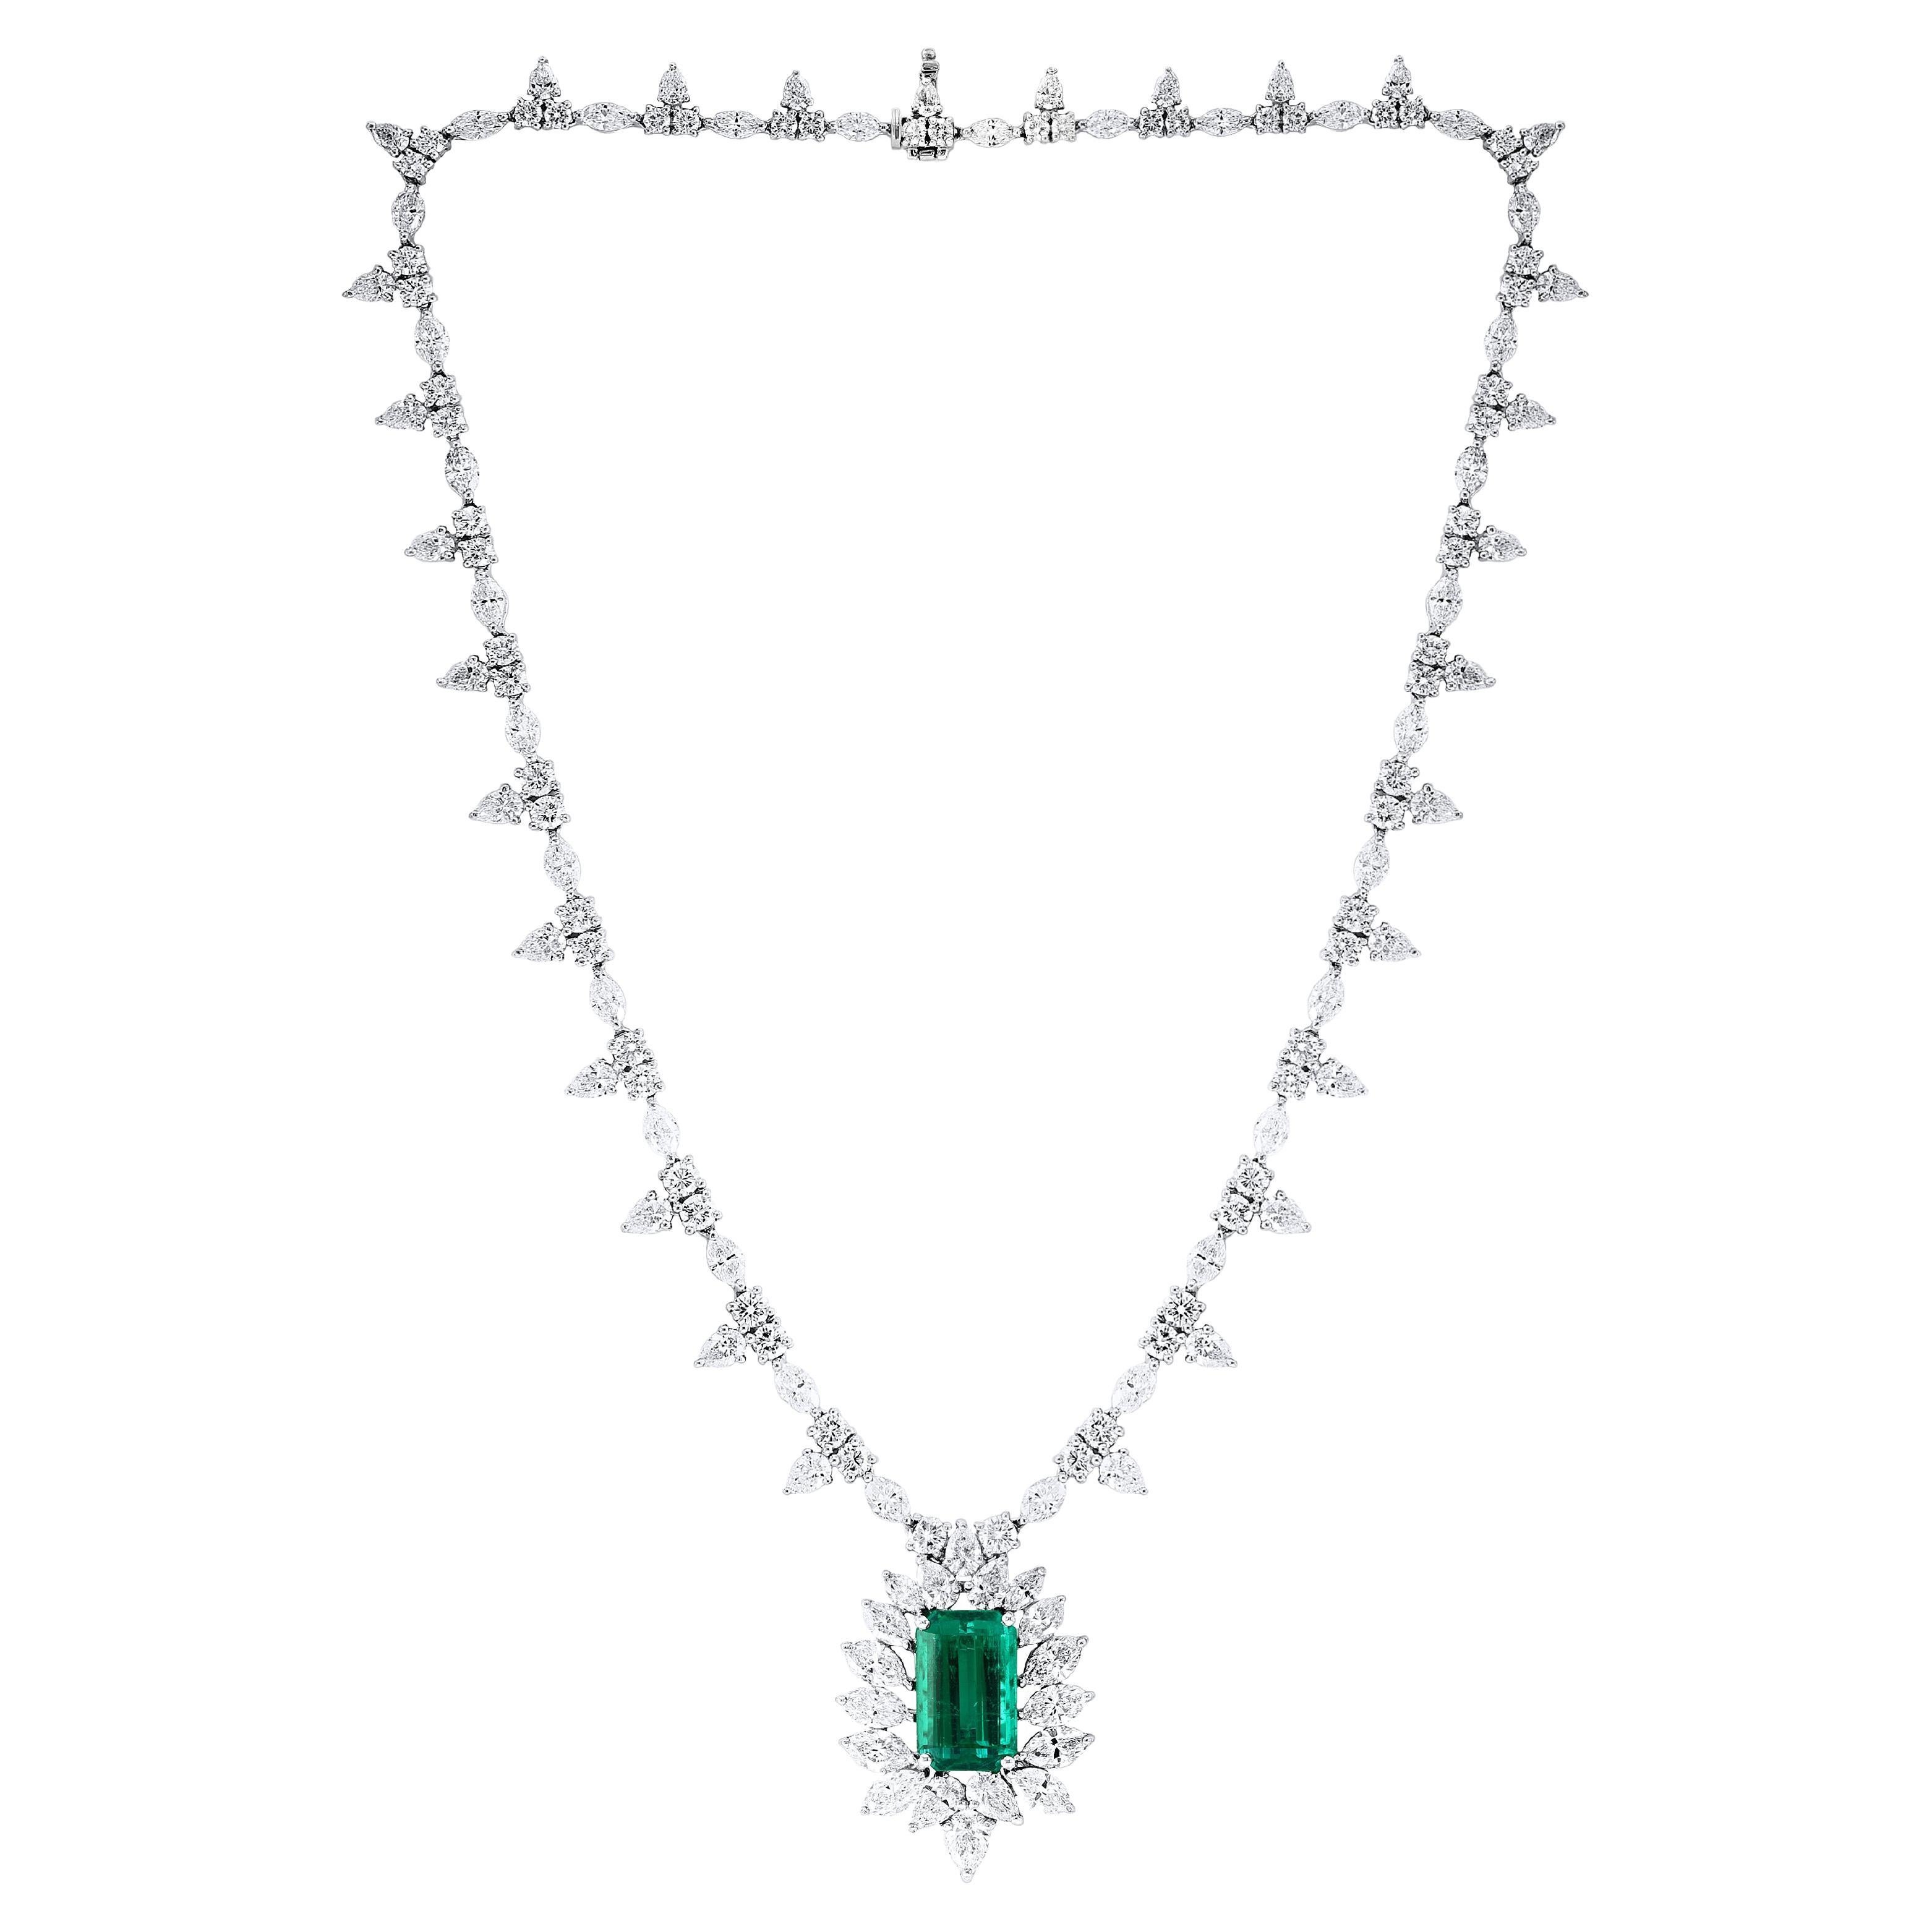 CERTIFIED 8.14 Carat Emerald and Diamond Necklace in Platinum